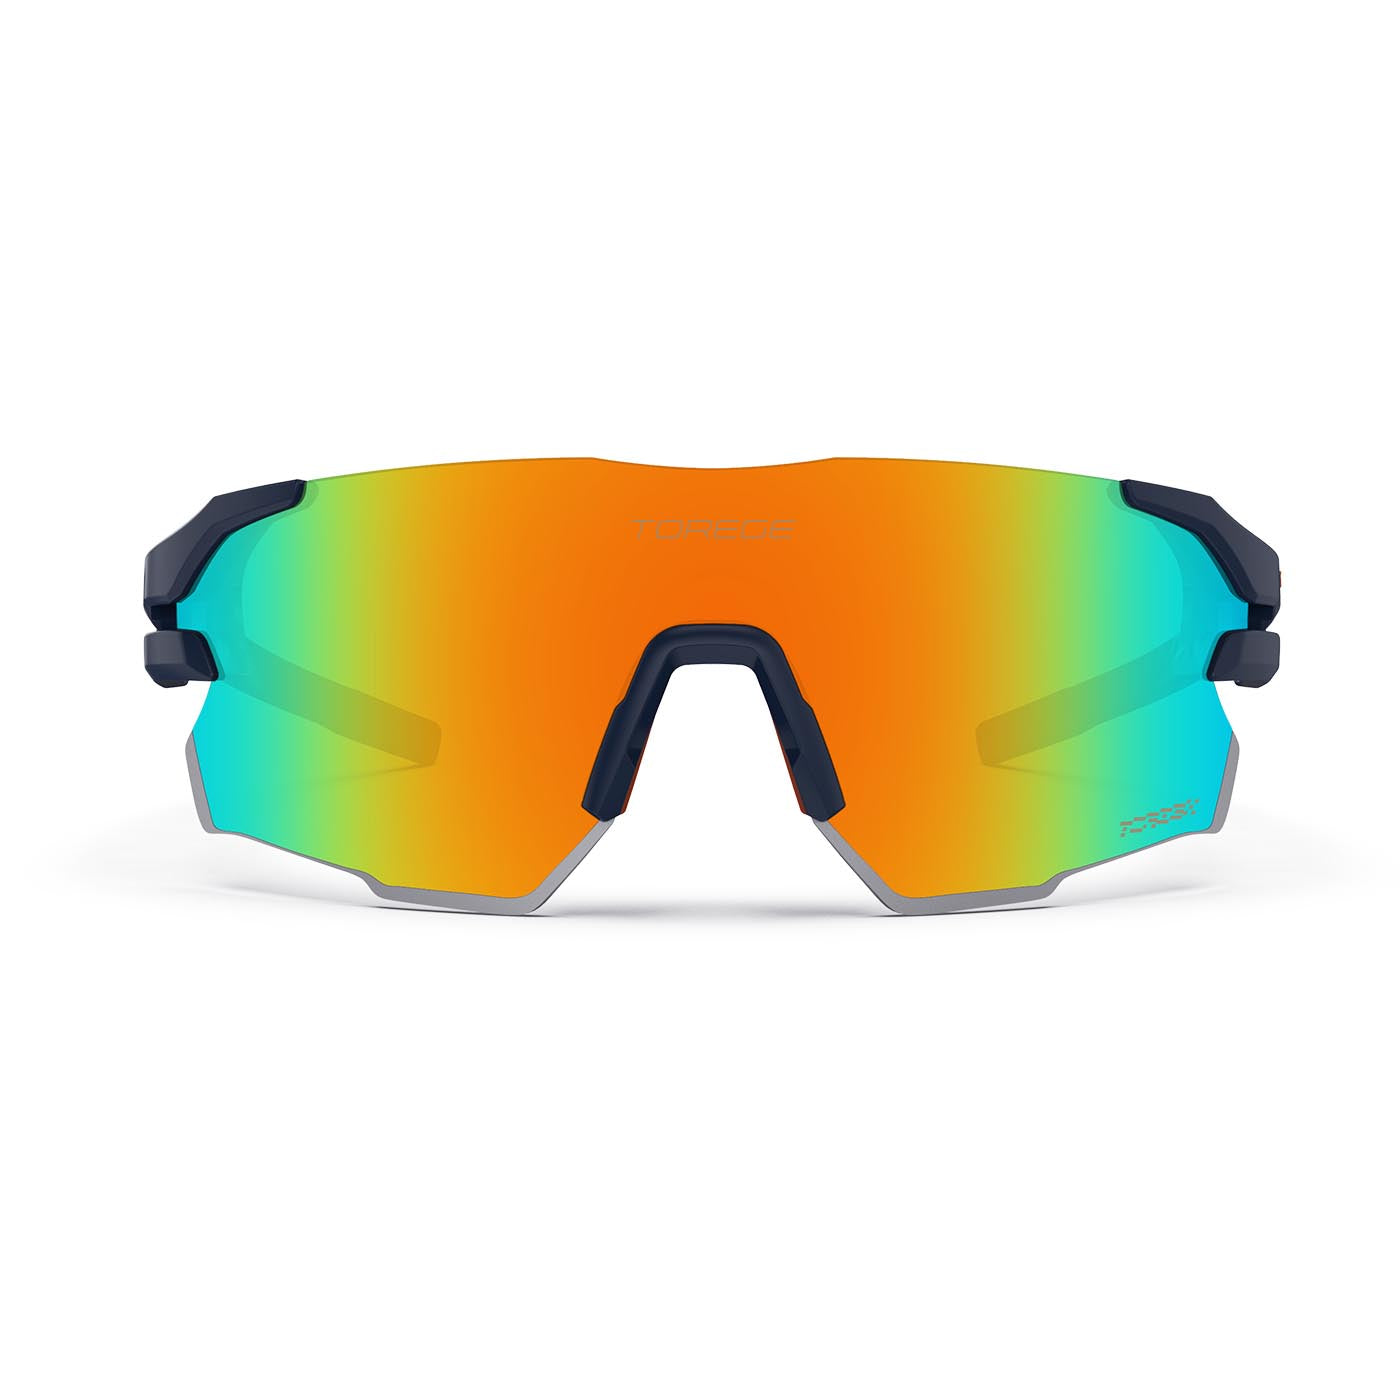 Tempation Ultra Lightweight Wraparound Sport Sunglasses for Active Men and  Women With Lifetime Warranty - Perfect for Cycling, Hiking, Fishing, Golf,  and Running - Matte Blue Frame & Sunlight Orange Lens | Sonnenbrillen